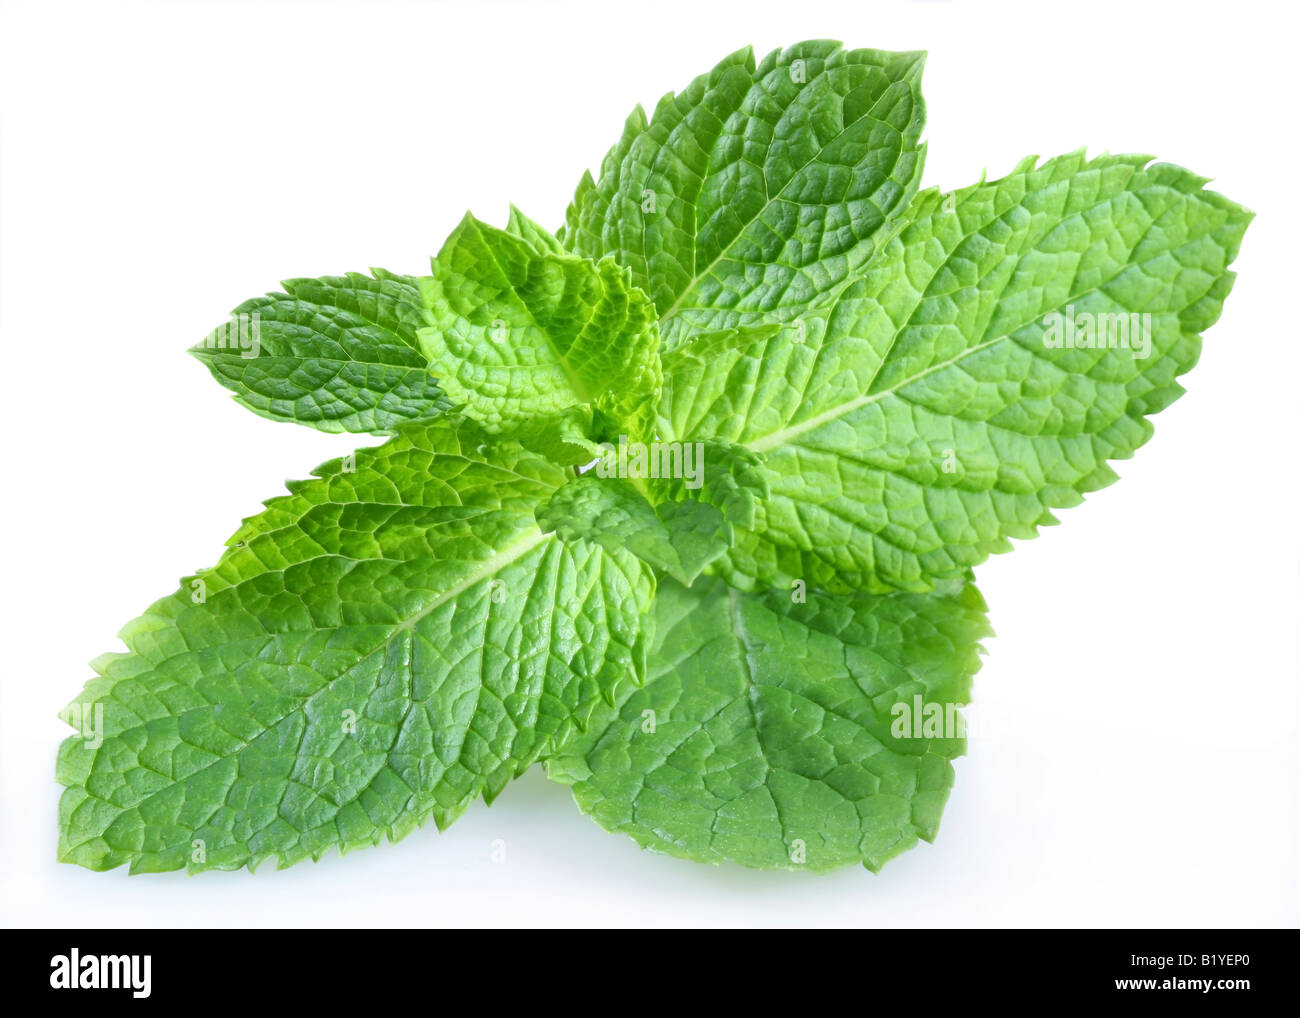 mint objects on white background Stock Photo